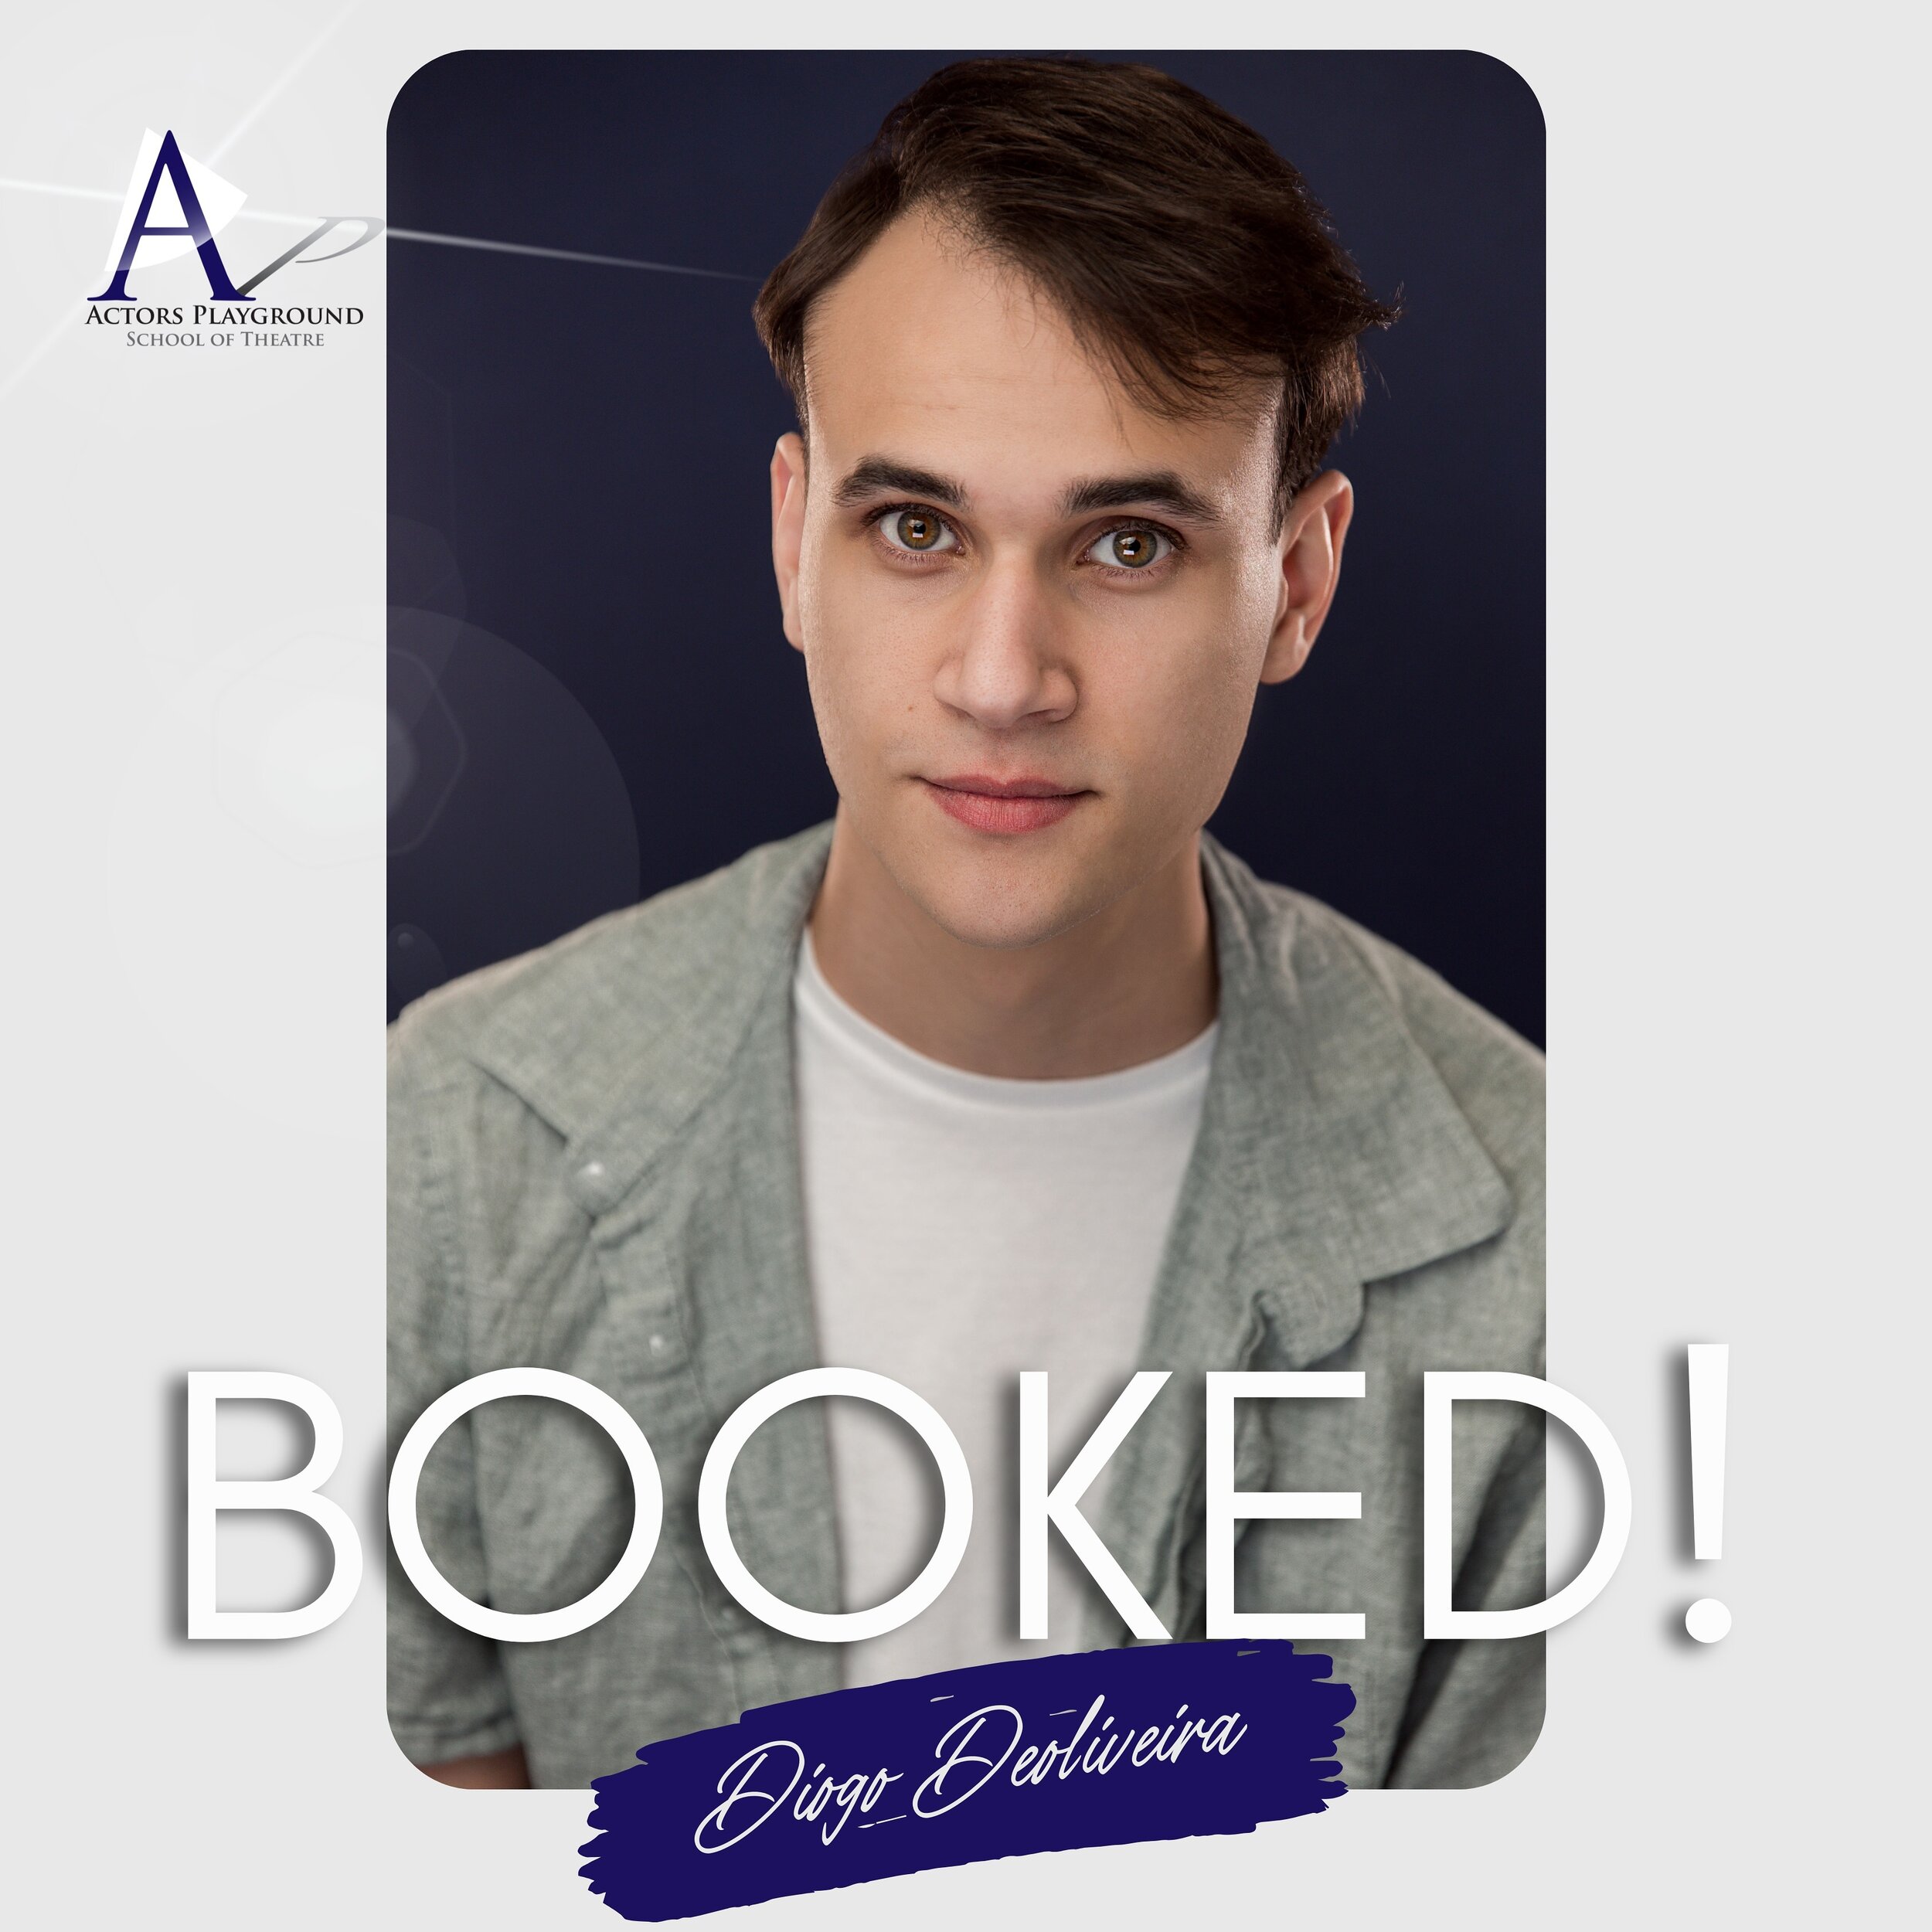 Congratulations to Diogo on his exciting network tv booking!!! 🎬📺 We&rsquo;re so proud of your hard work! Keep it up! 👏⭐️✨